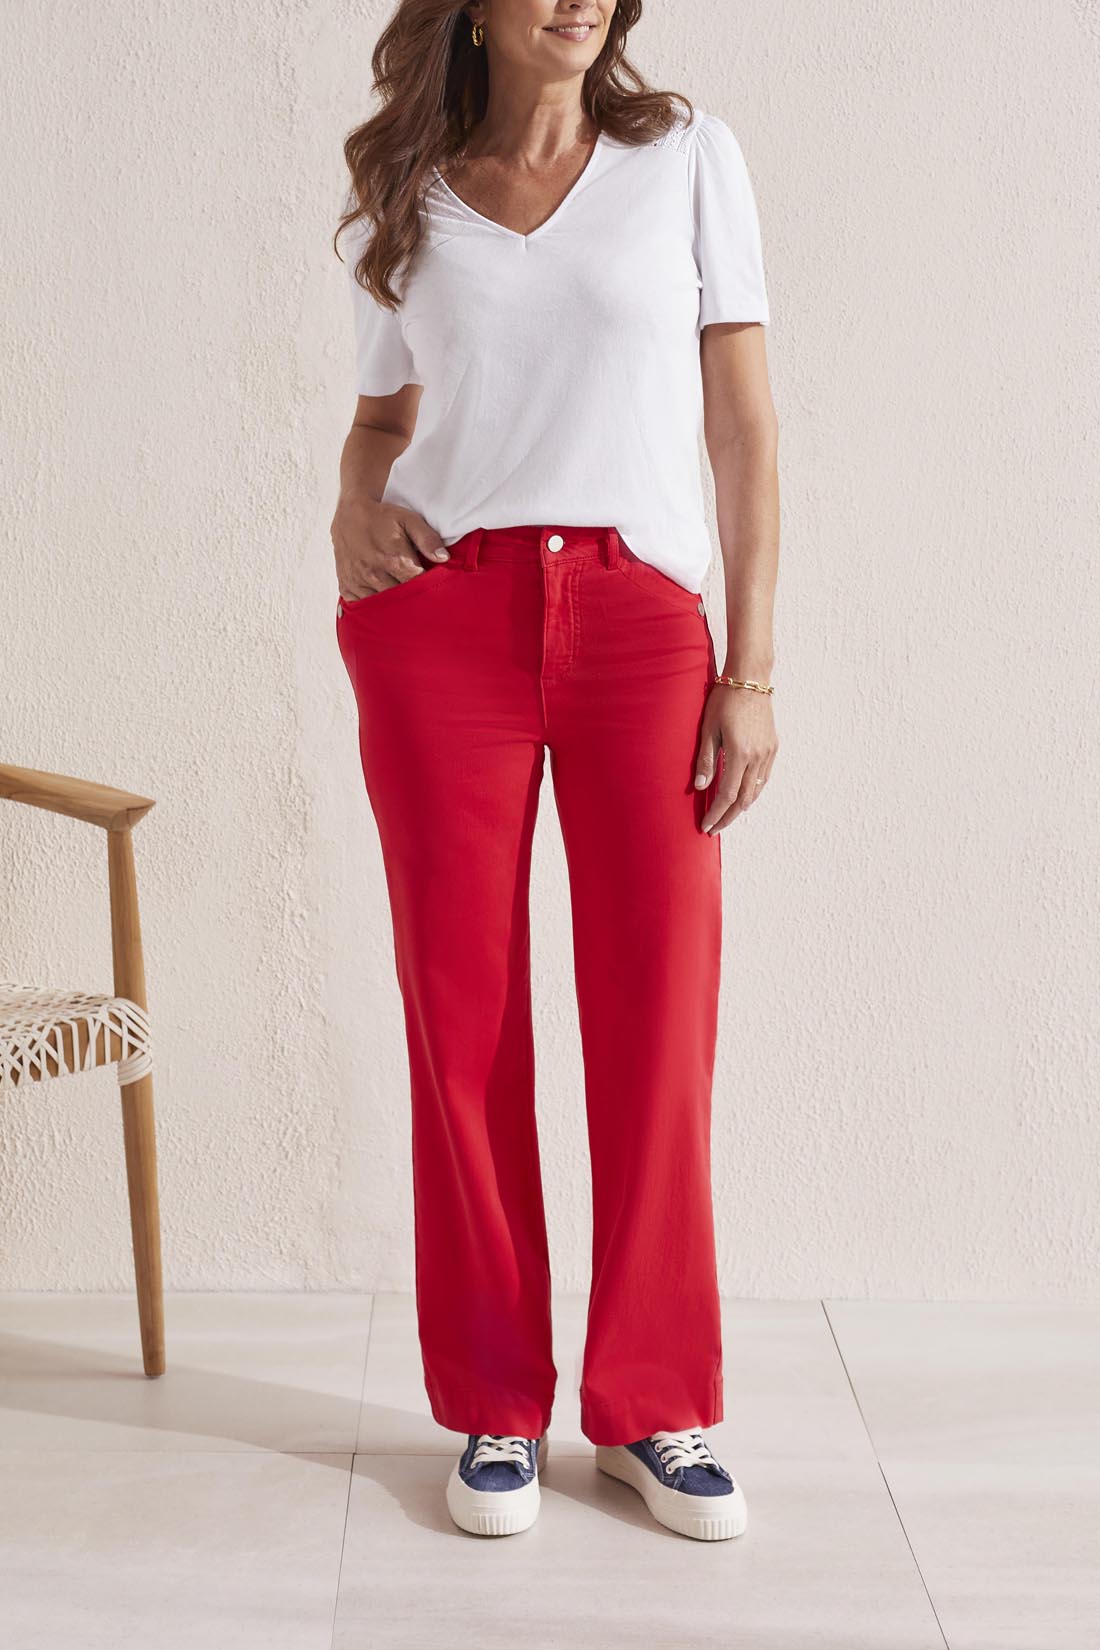 Poppy Red Micro Flare Jeans by Tribal